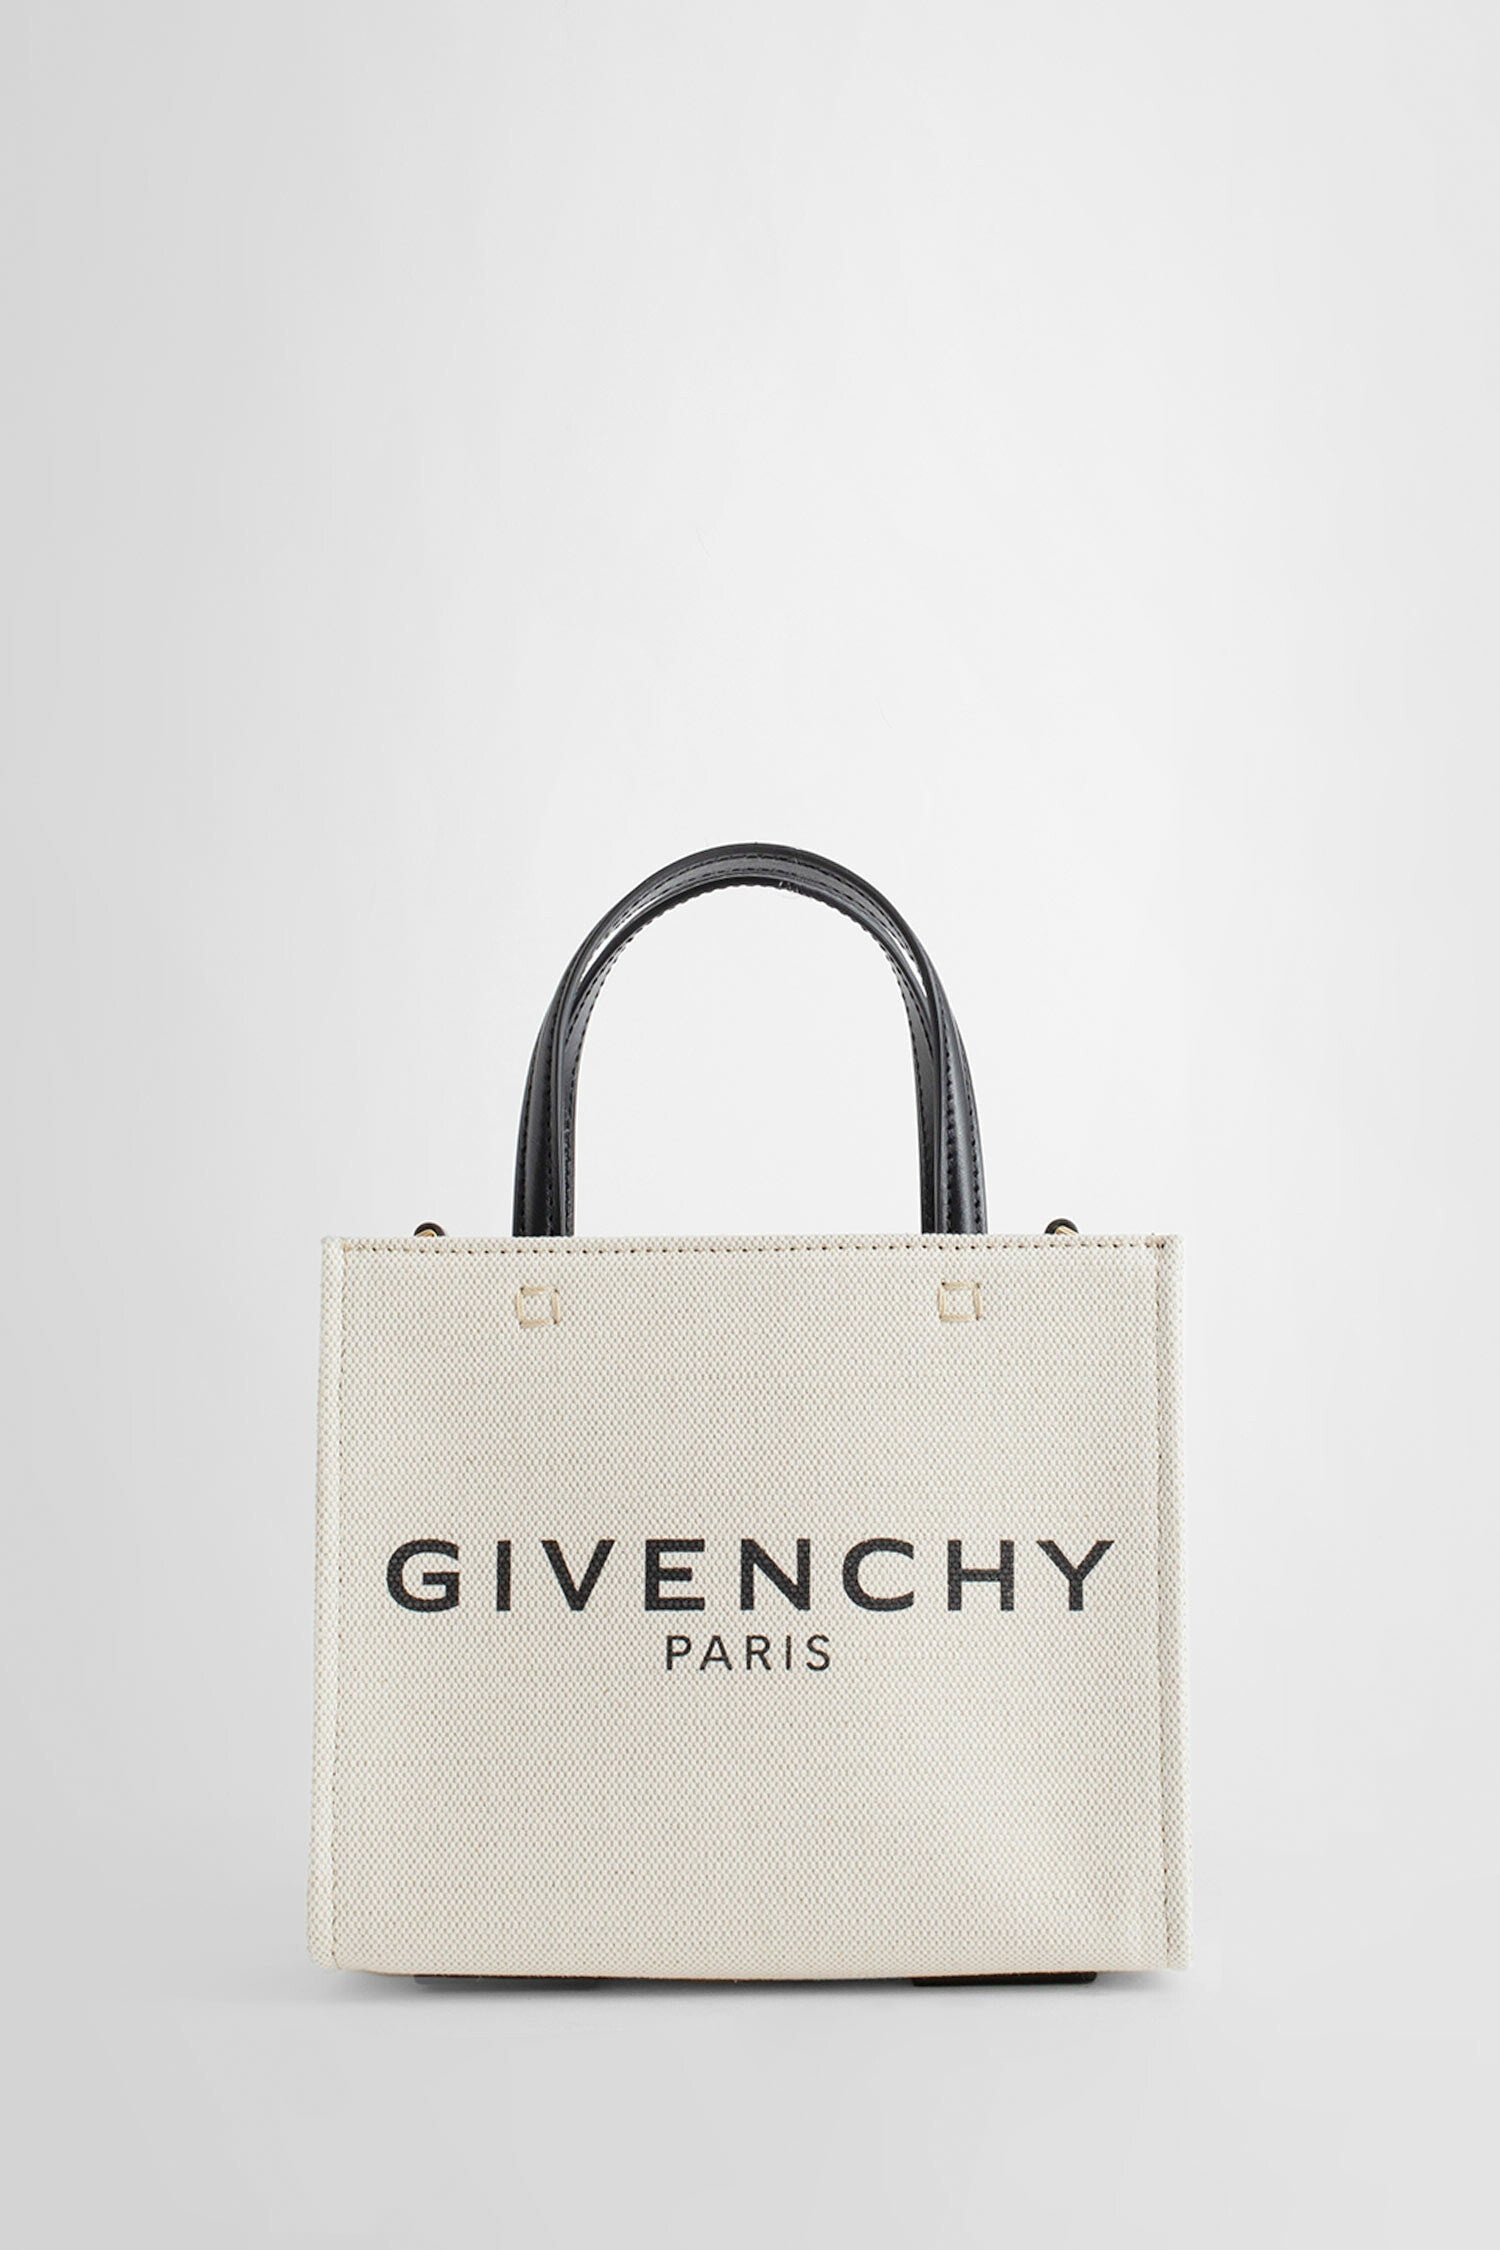 GIVENCHY WOMAN BEIGE TOTE BAGS - 1